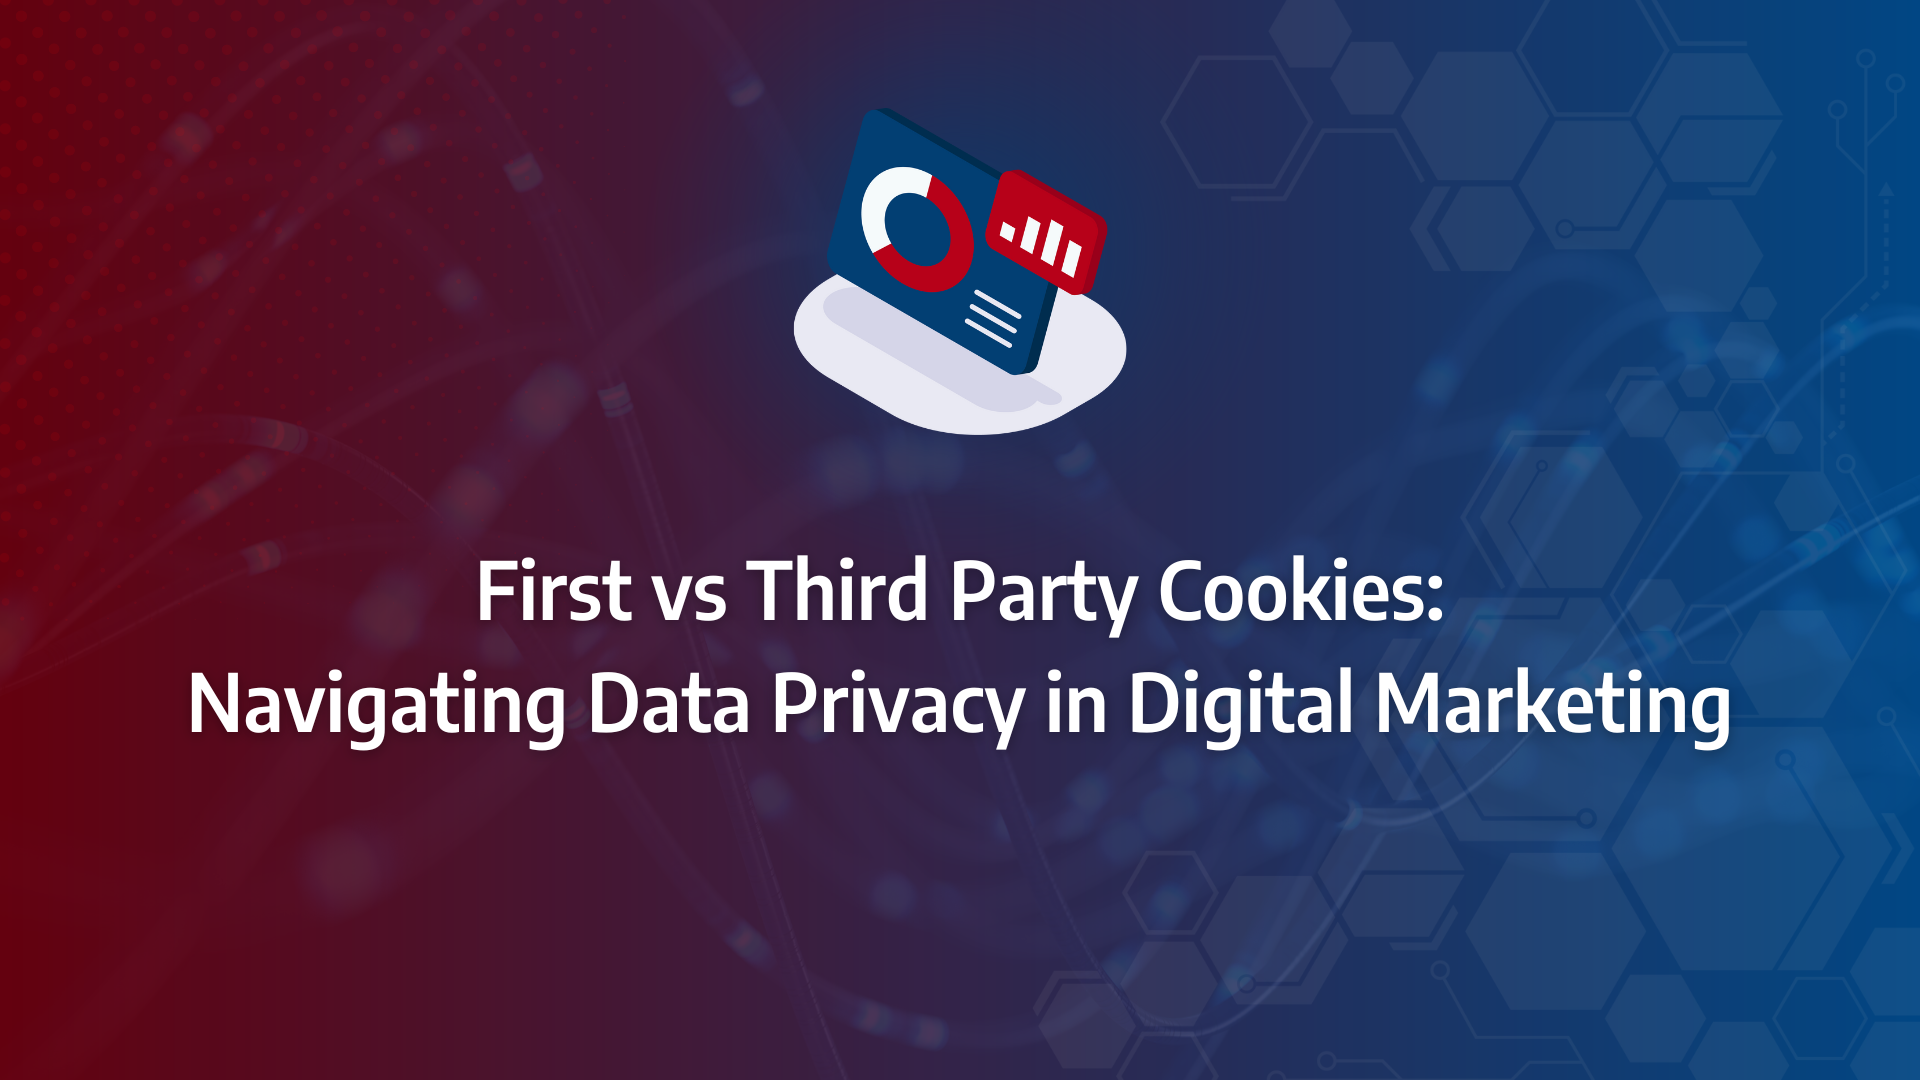 the ultimate guide to first vs third party cookies incorporating first-party cookies, third-party cookie, cross-site tracking, data privacy, user tracking